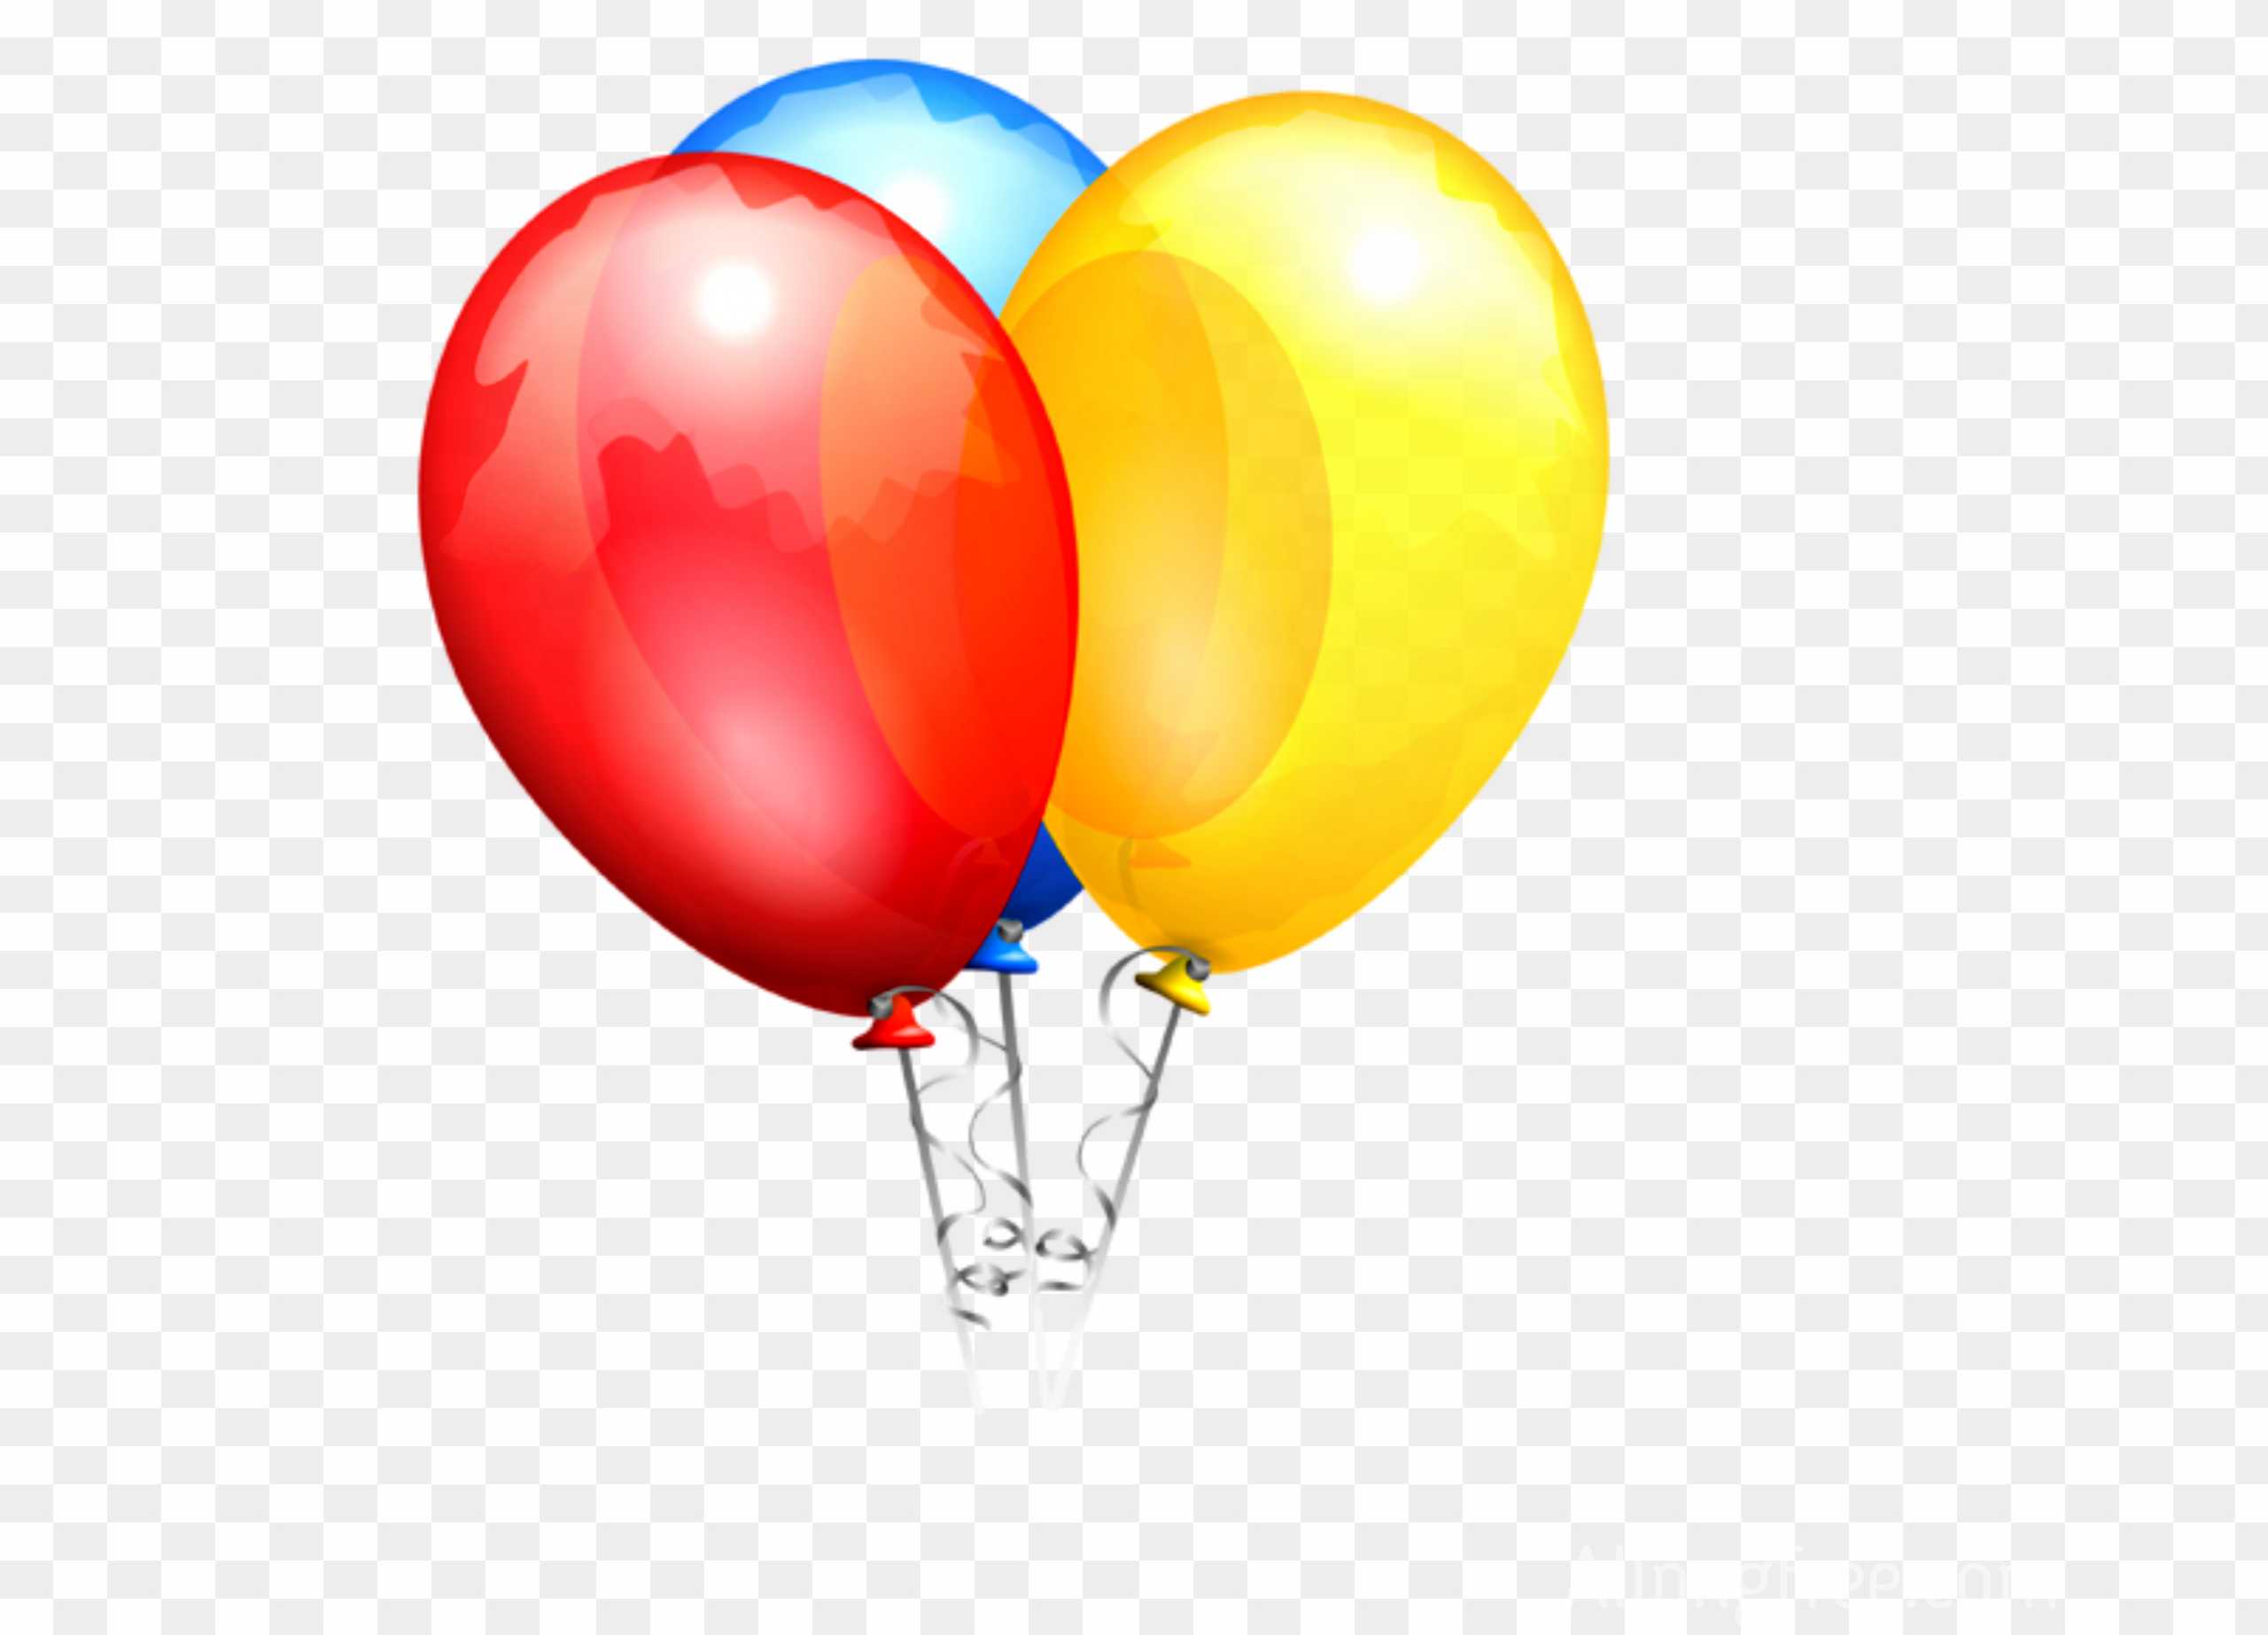 Birthday balloon png free download